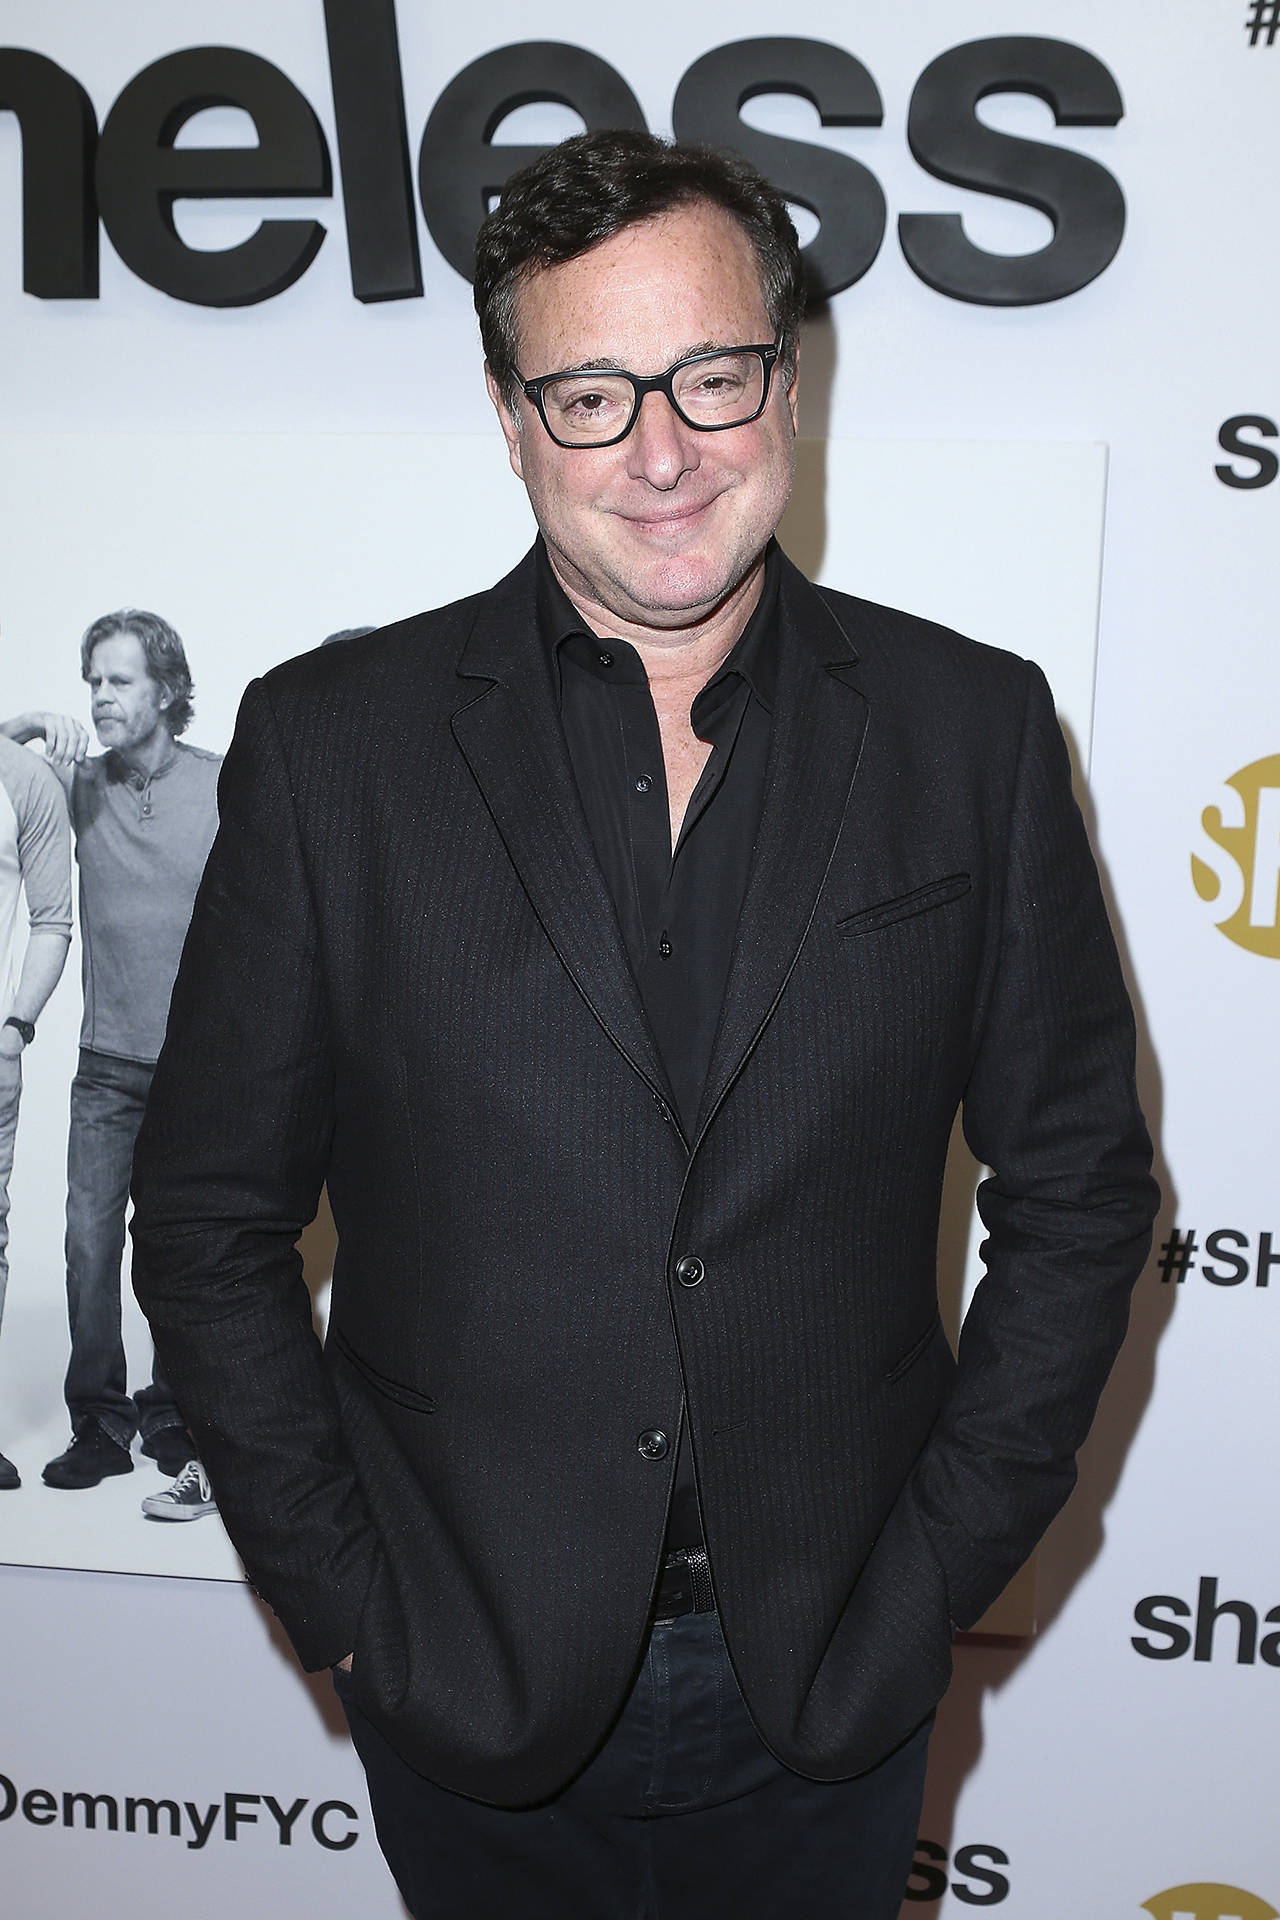 The producers of “America’s Funniest Home Videos” tapped Bob Saget again for its new TV series. (Art Garcia/Sipa USA)